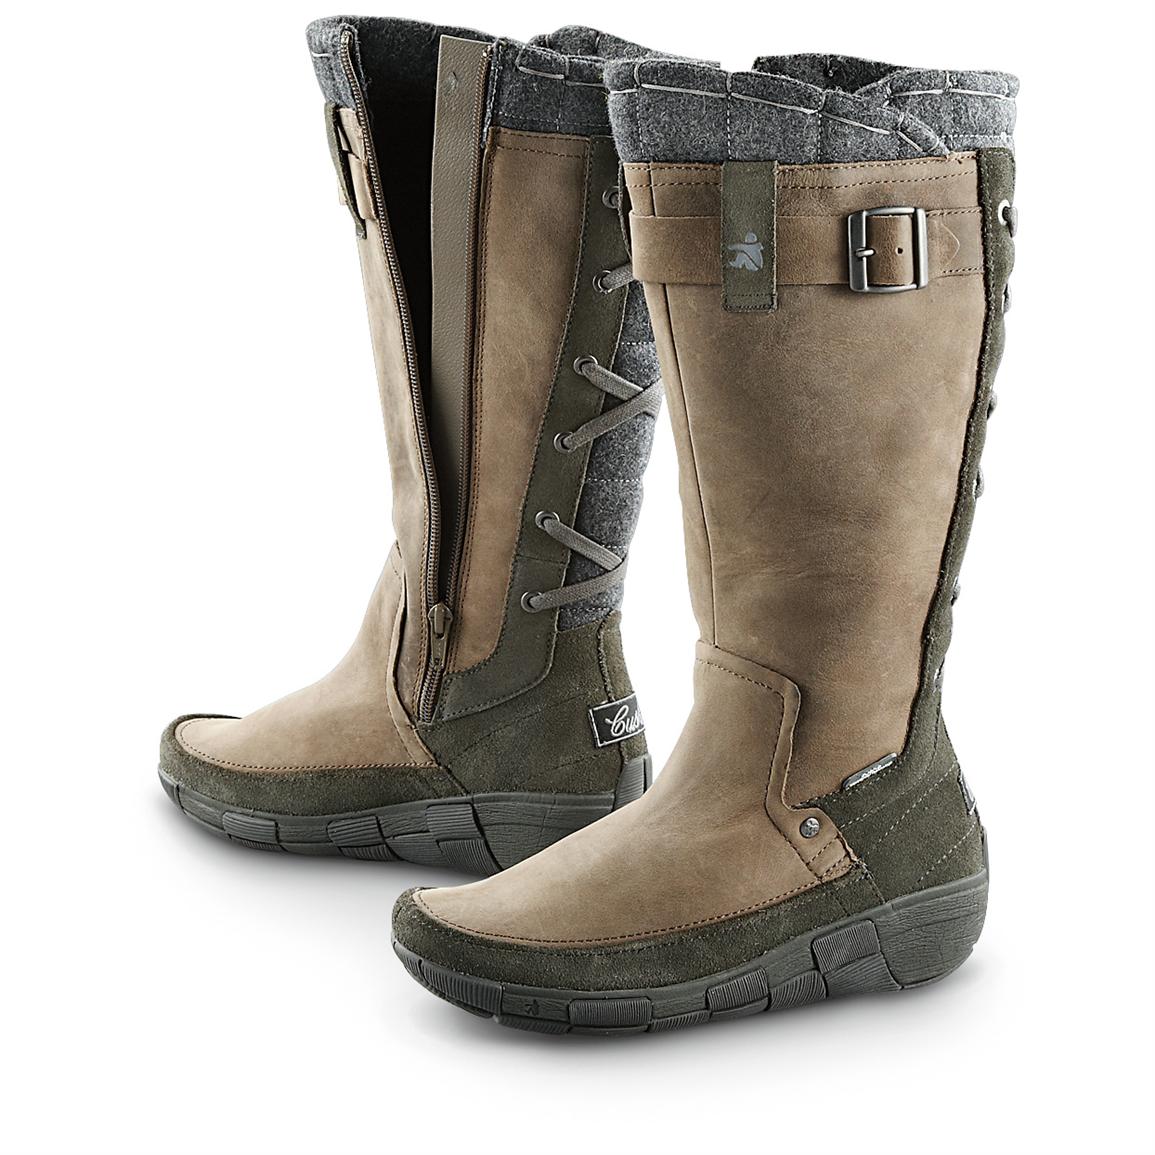 Women's Cushe® Conscience Boots, Gray Winter Snow Boots at Sportsman's Guide